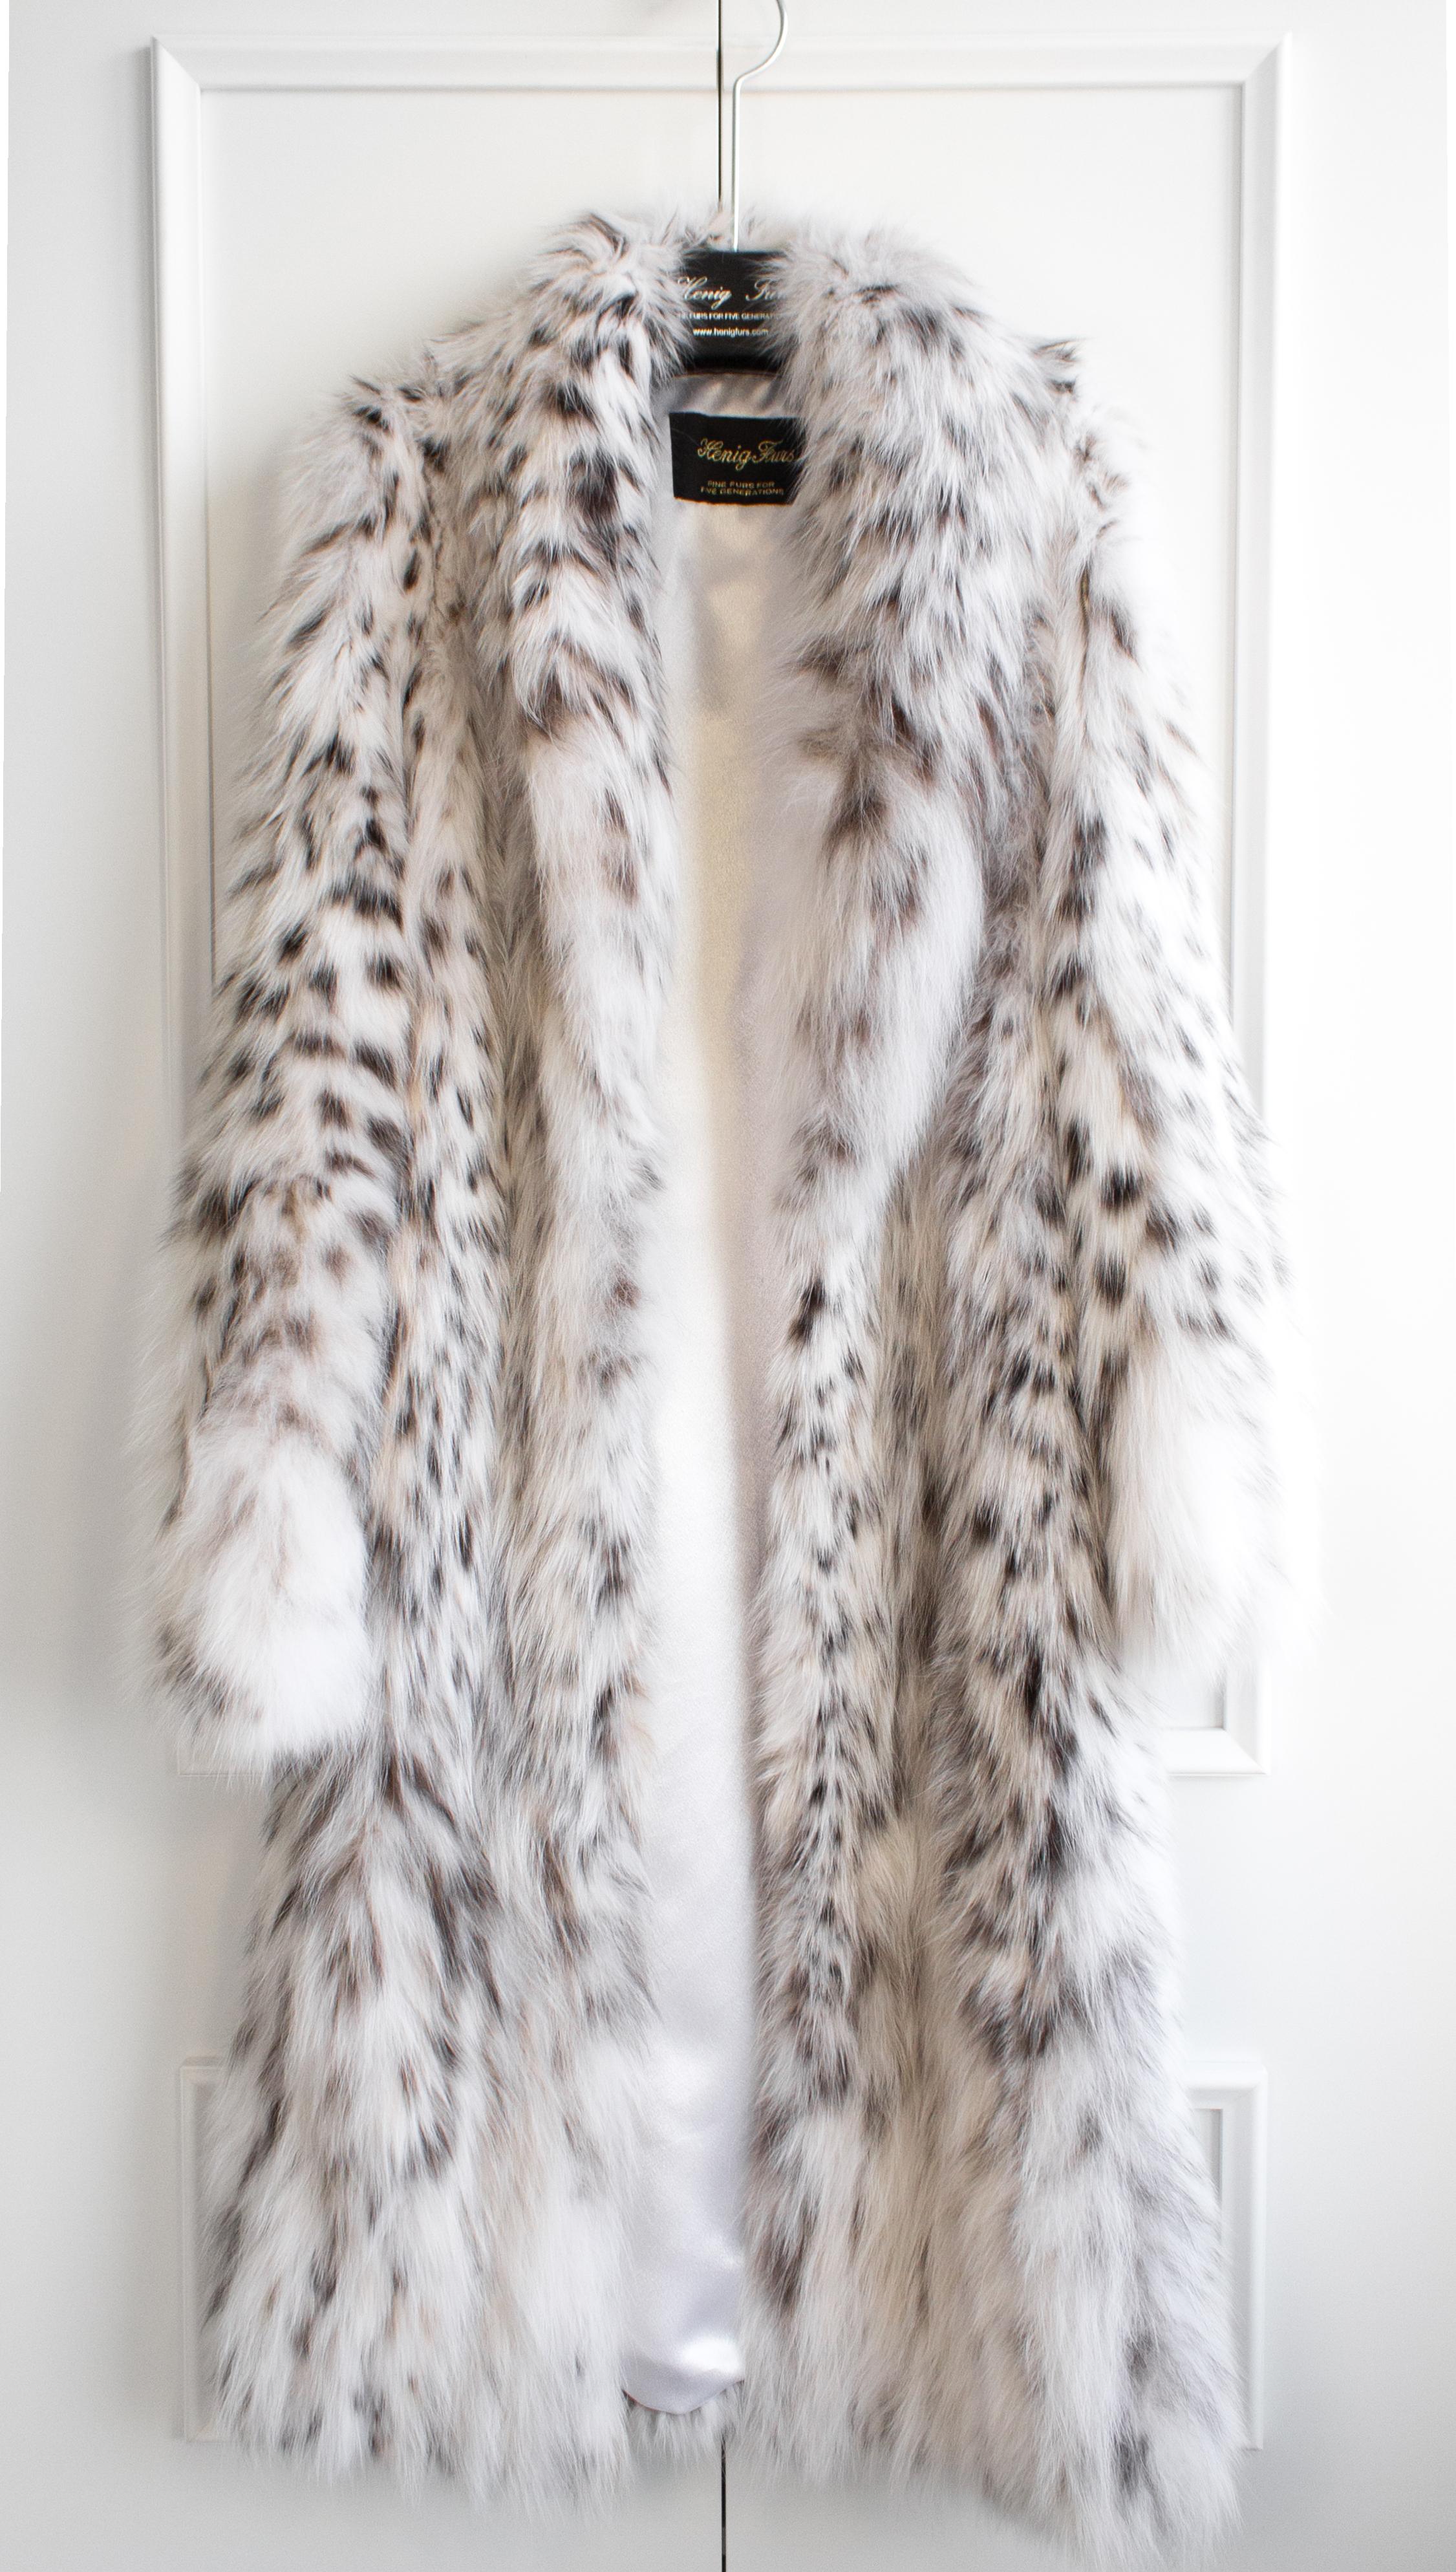 Wrap yourself in luxury with this stunning finest North American white lynx belly fur coat. Crafted from the purest white lynx fur, sourced from North America and expertly handcrafted in the USA, this coat is a Haute Couture of furs and an epitome